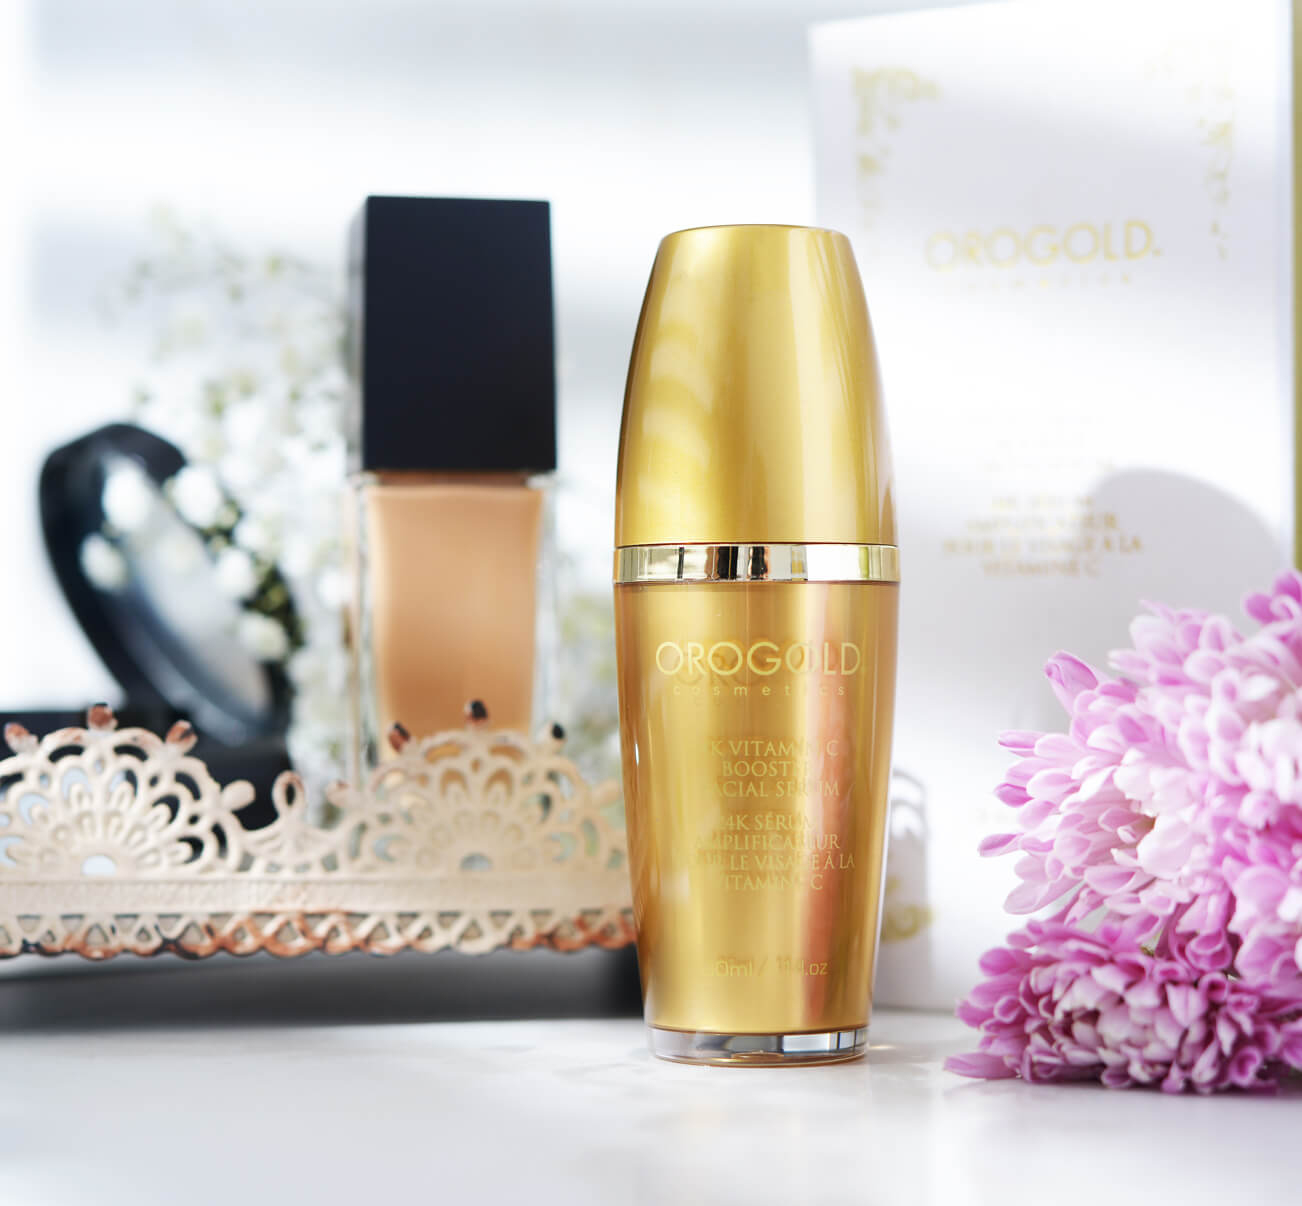 The Top 10 Ways To Brighten Up Your Skin - Orogold Reviews concernant Orogold Serum 